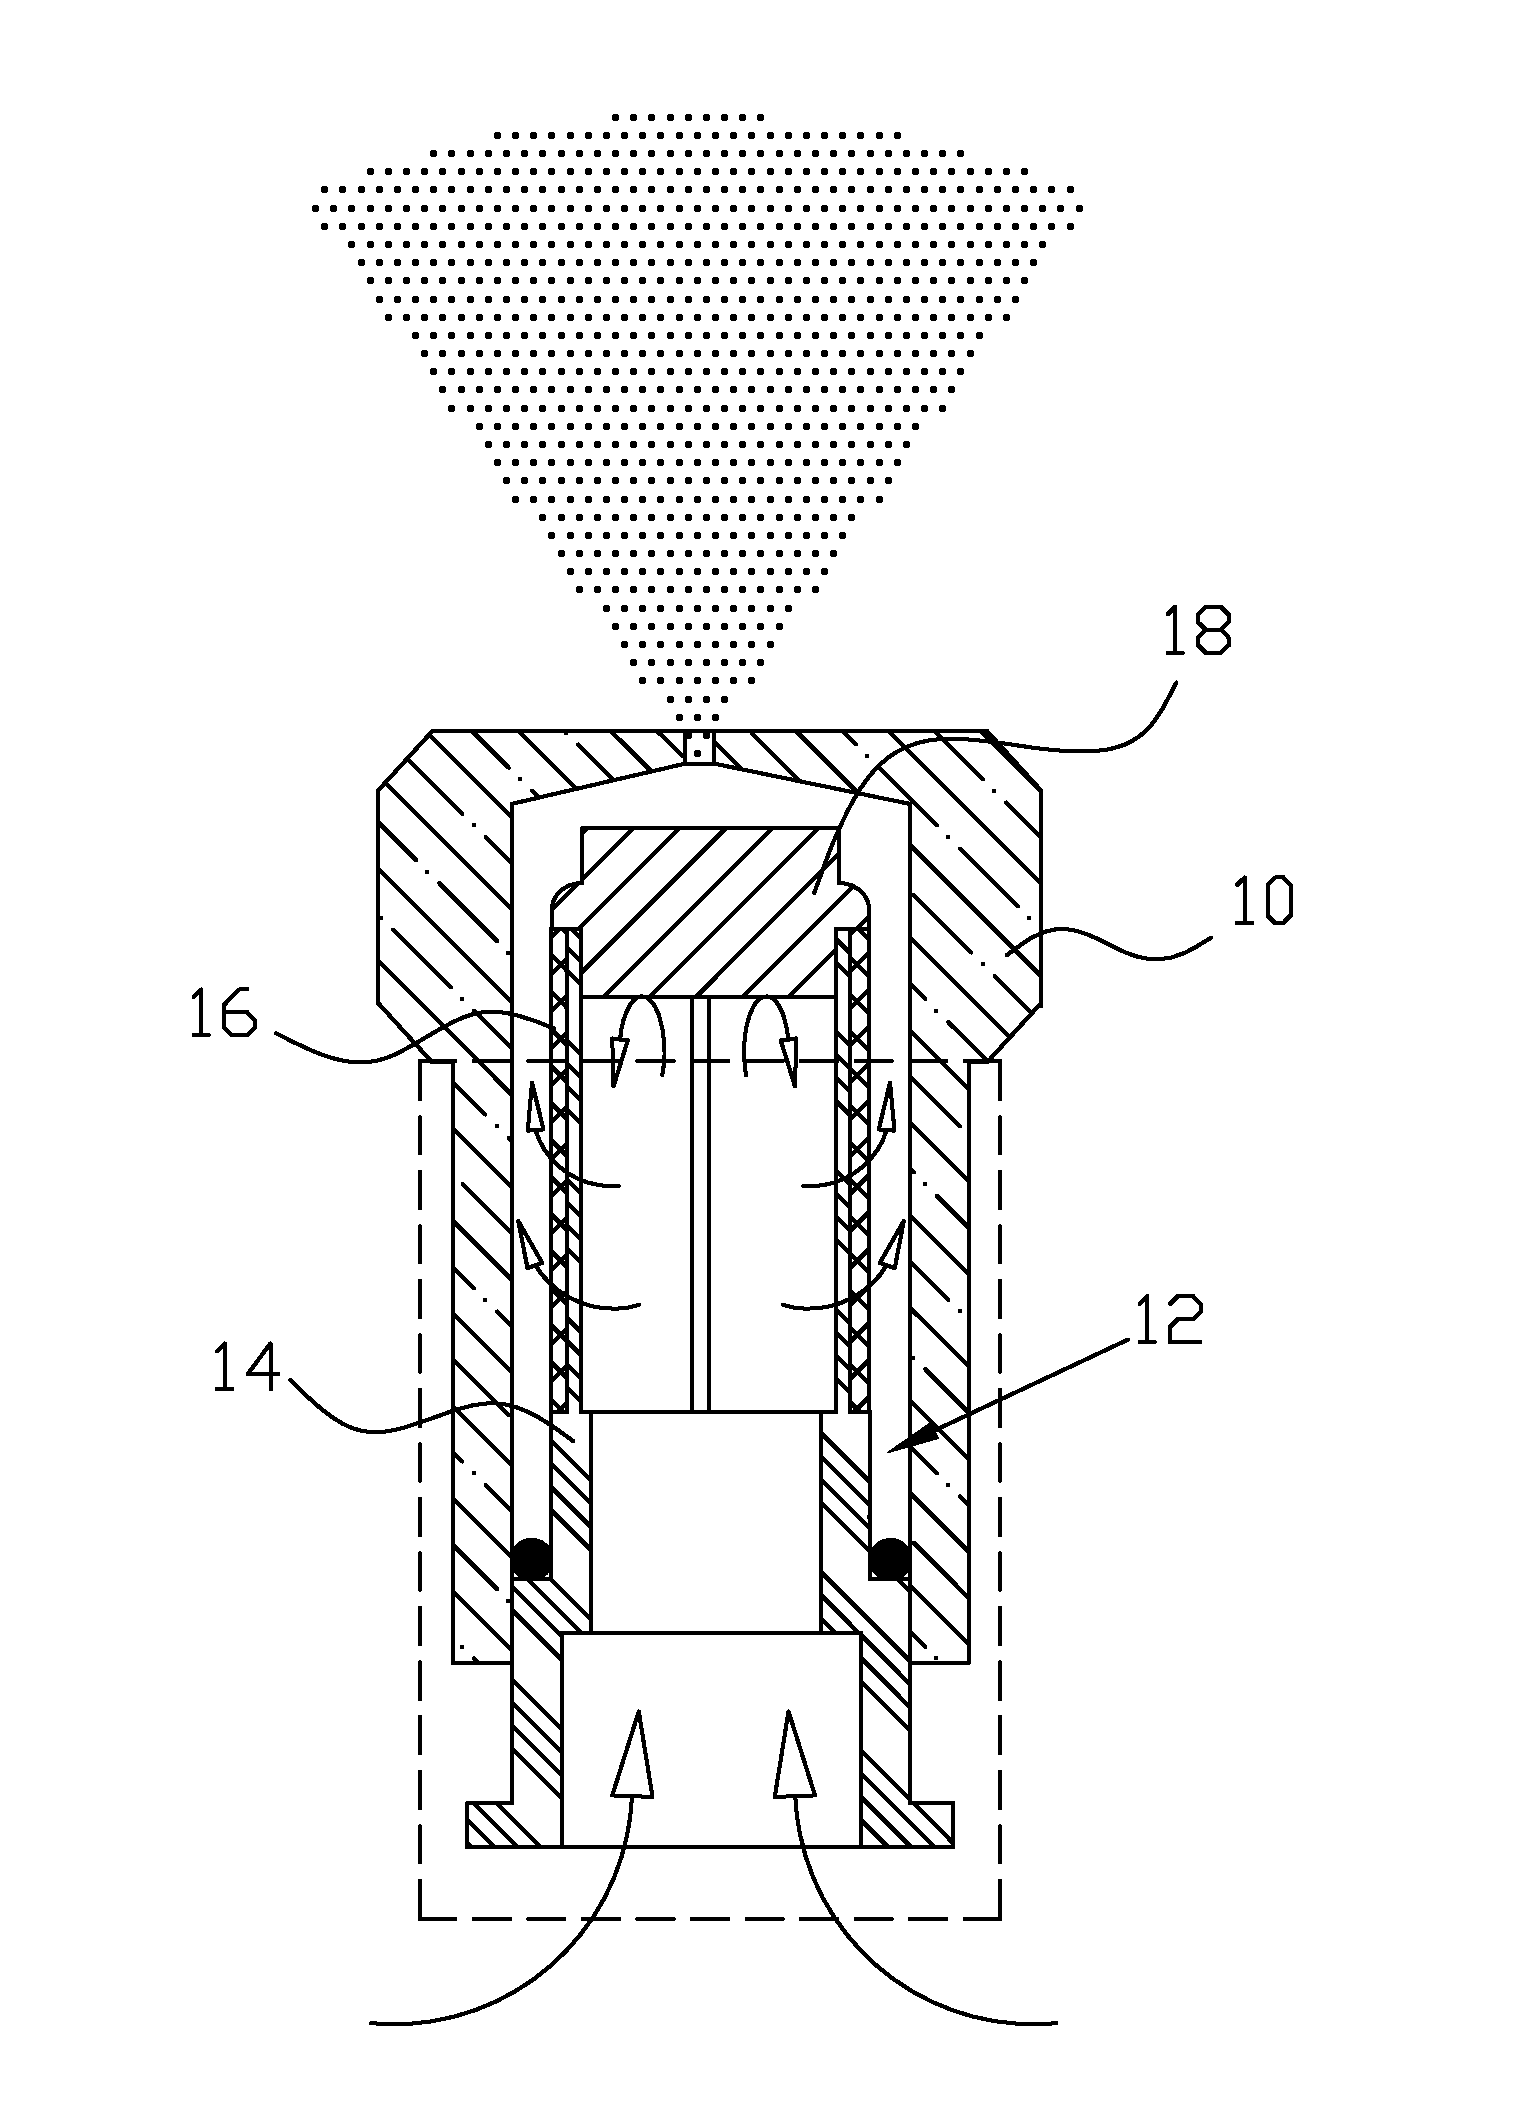 Atomizing nozzle equipped with filtering assembly